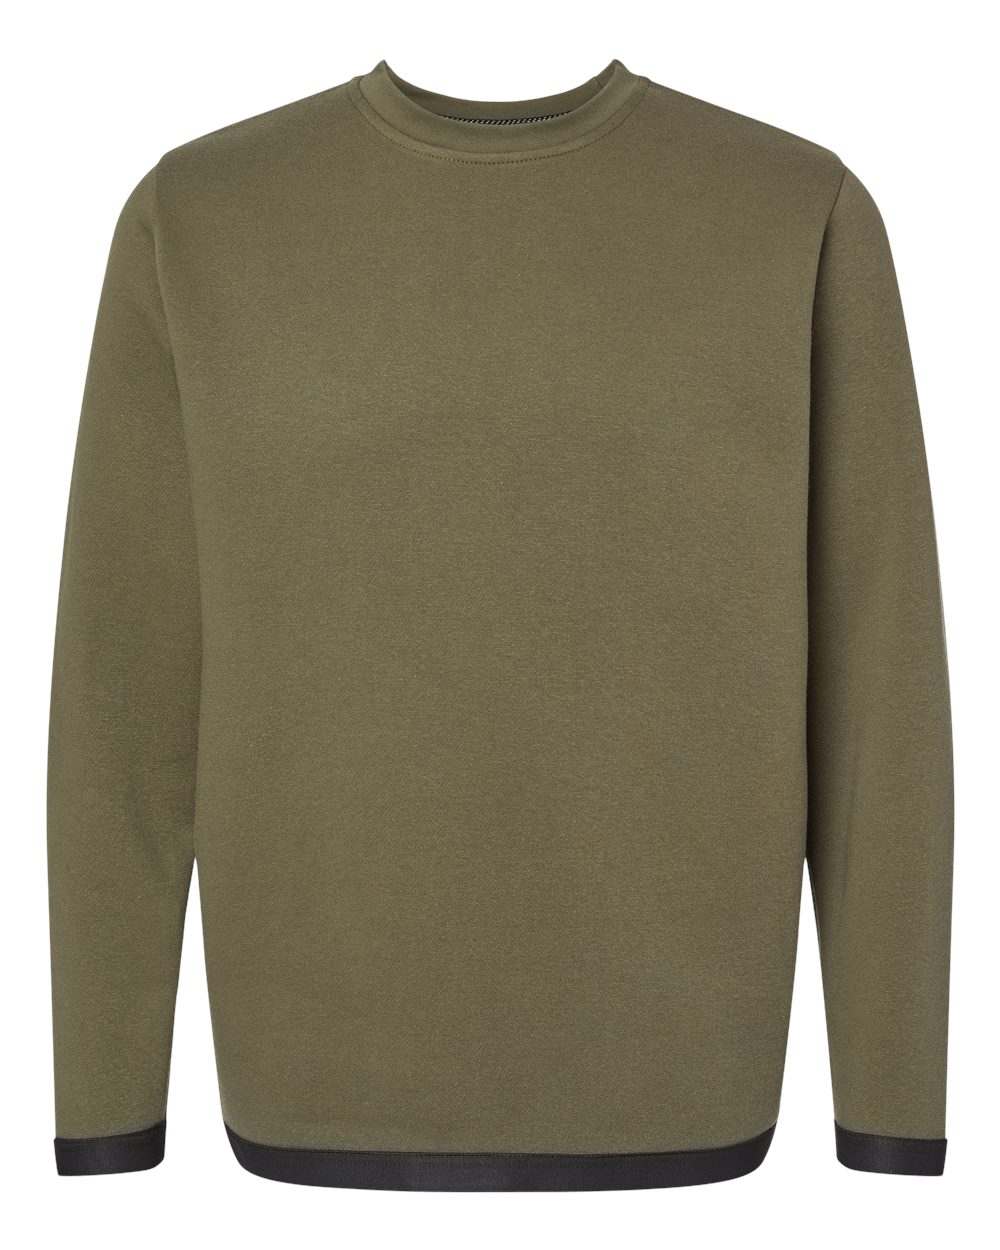 click to view Military Green/ Black